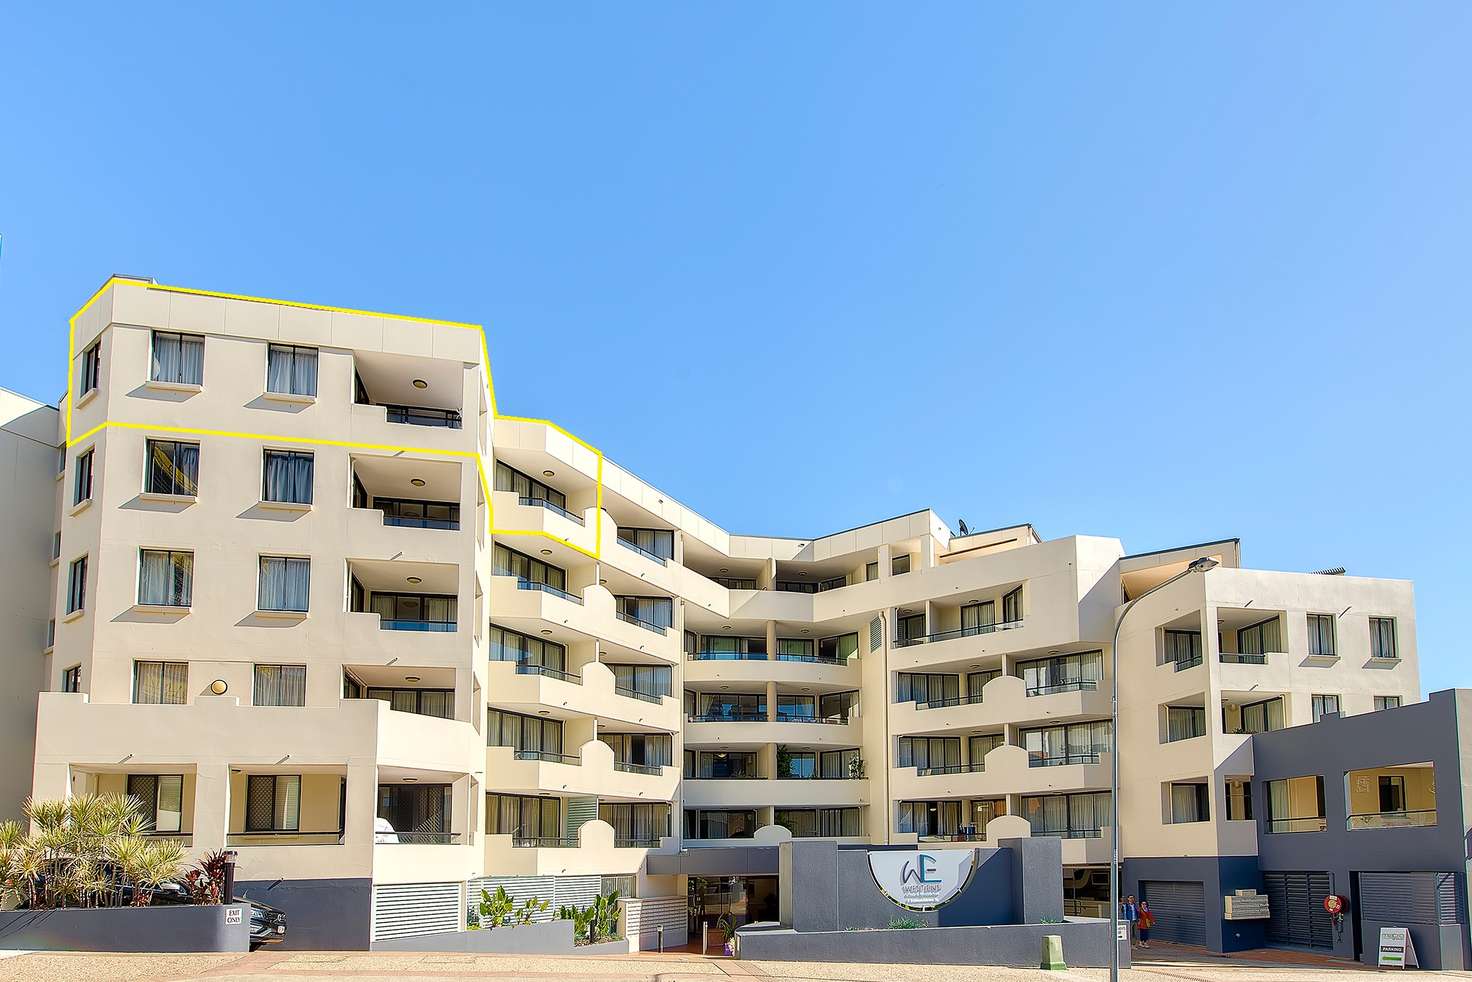 Main view of Homely apartment listing, 503-504/5 Edmondstone Street, South Brisbane QLD 4101